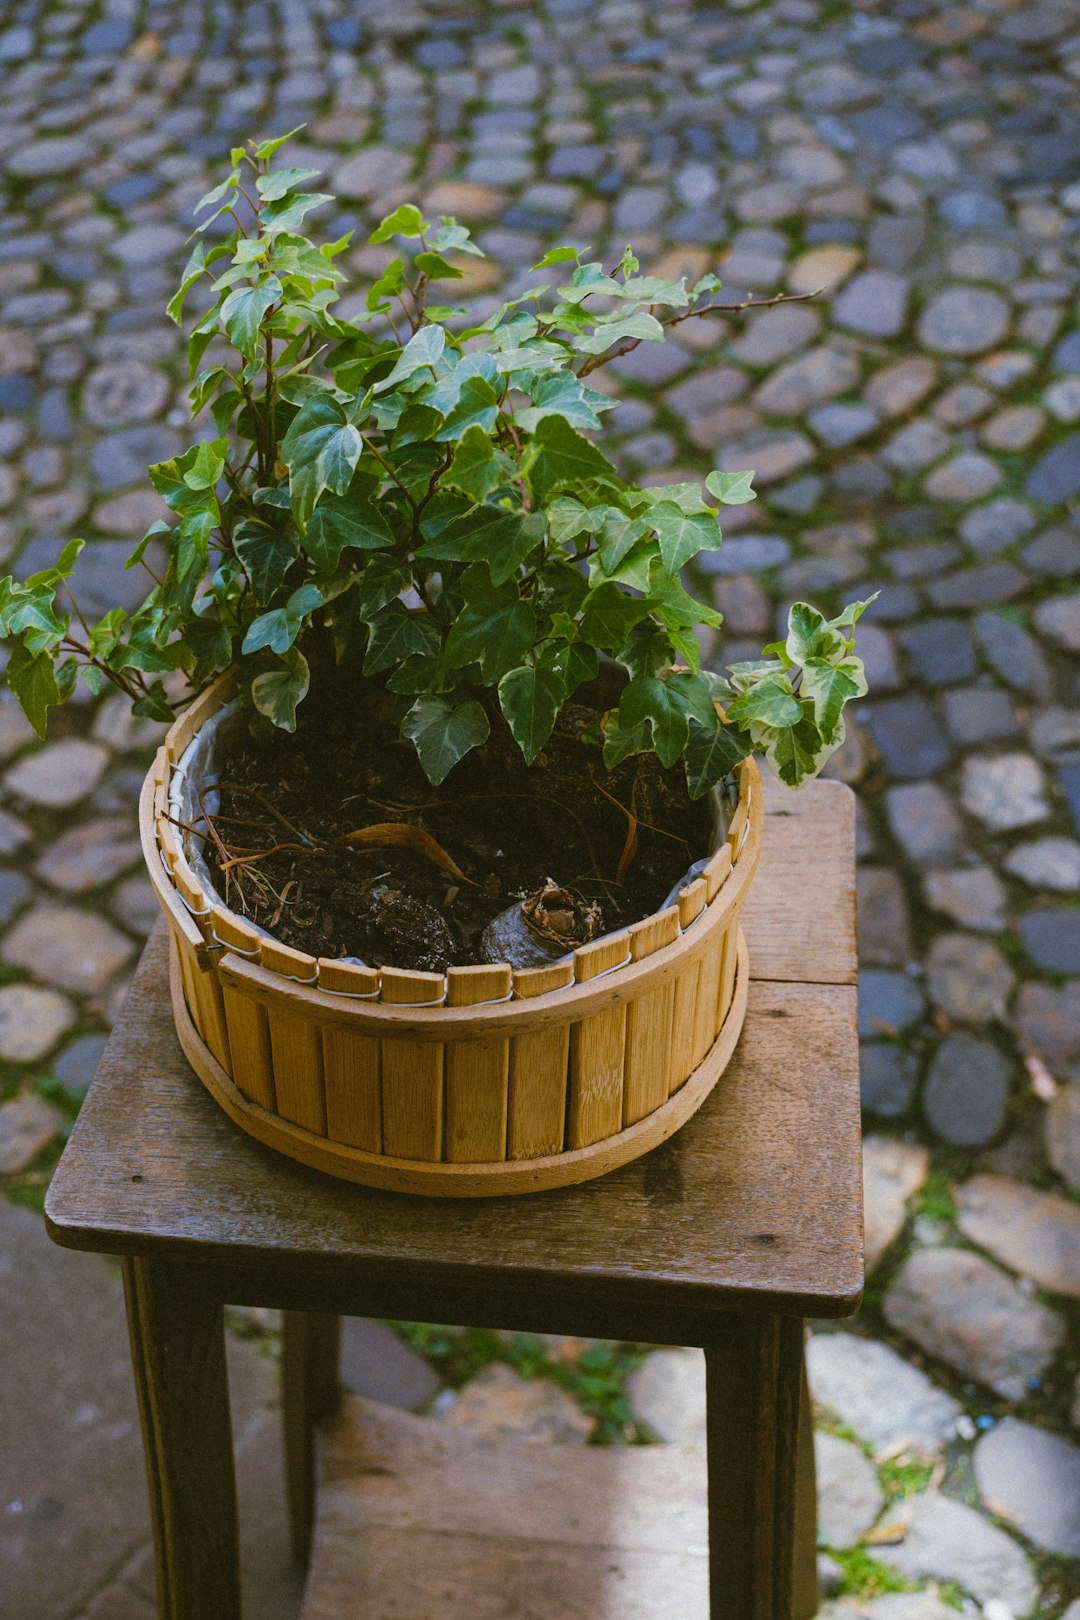 green plant on brown wooden pot